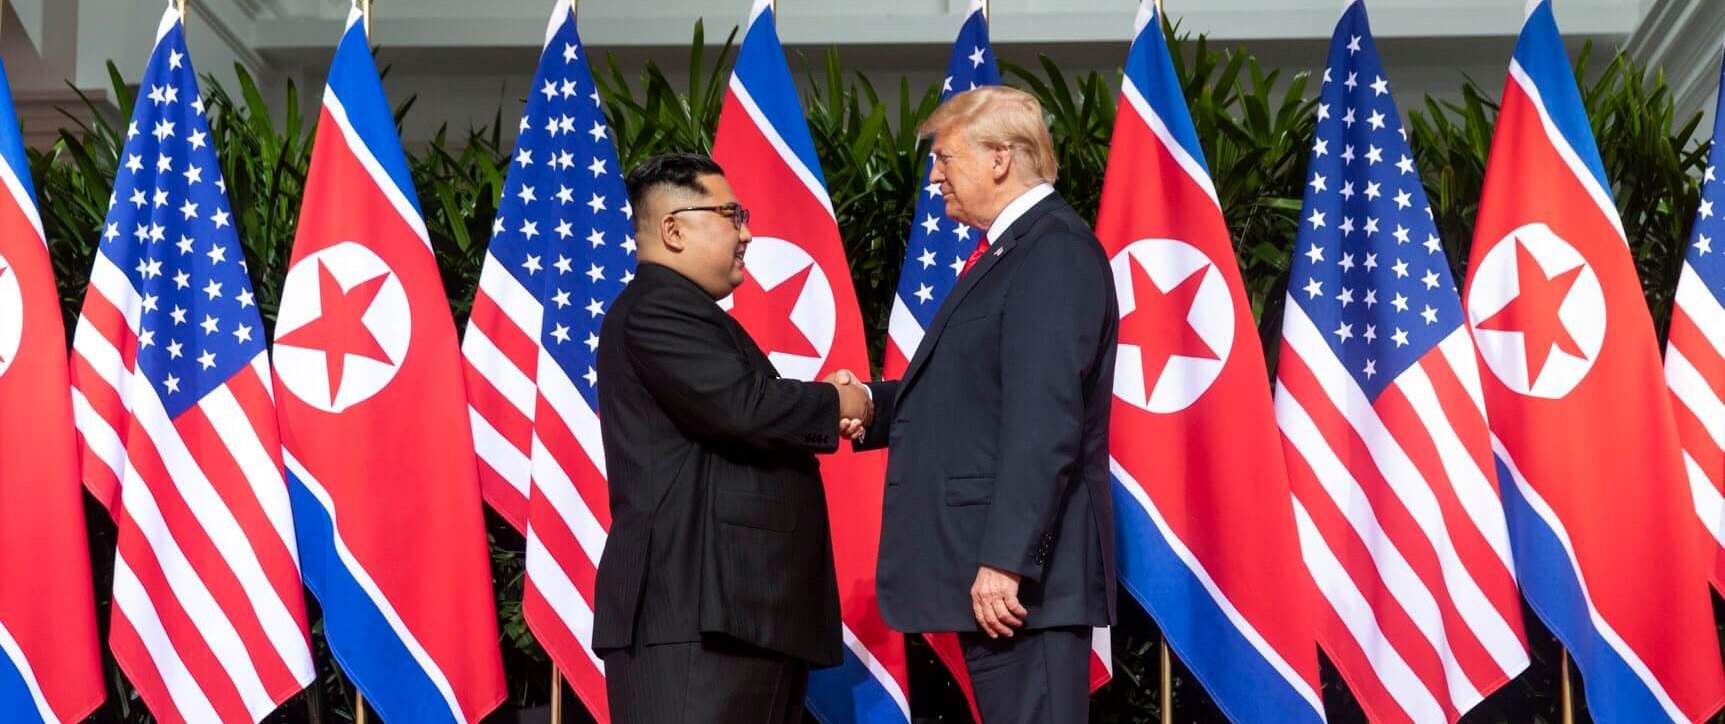 Kim and Trump shaking hands at the red carpet during the DPRK–USA Singapore Summit e1599132464464